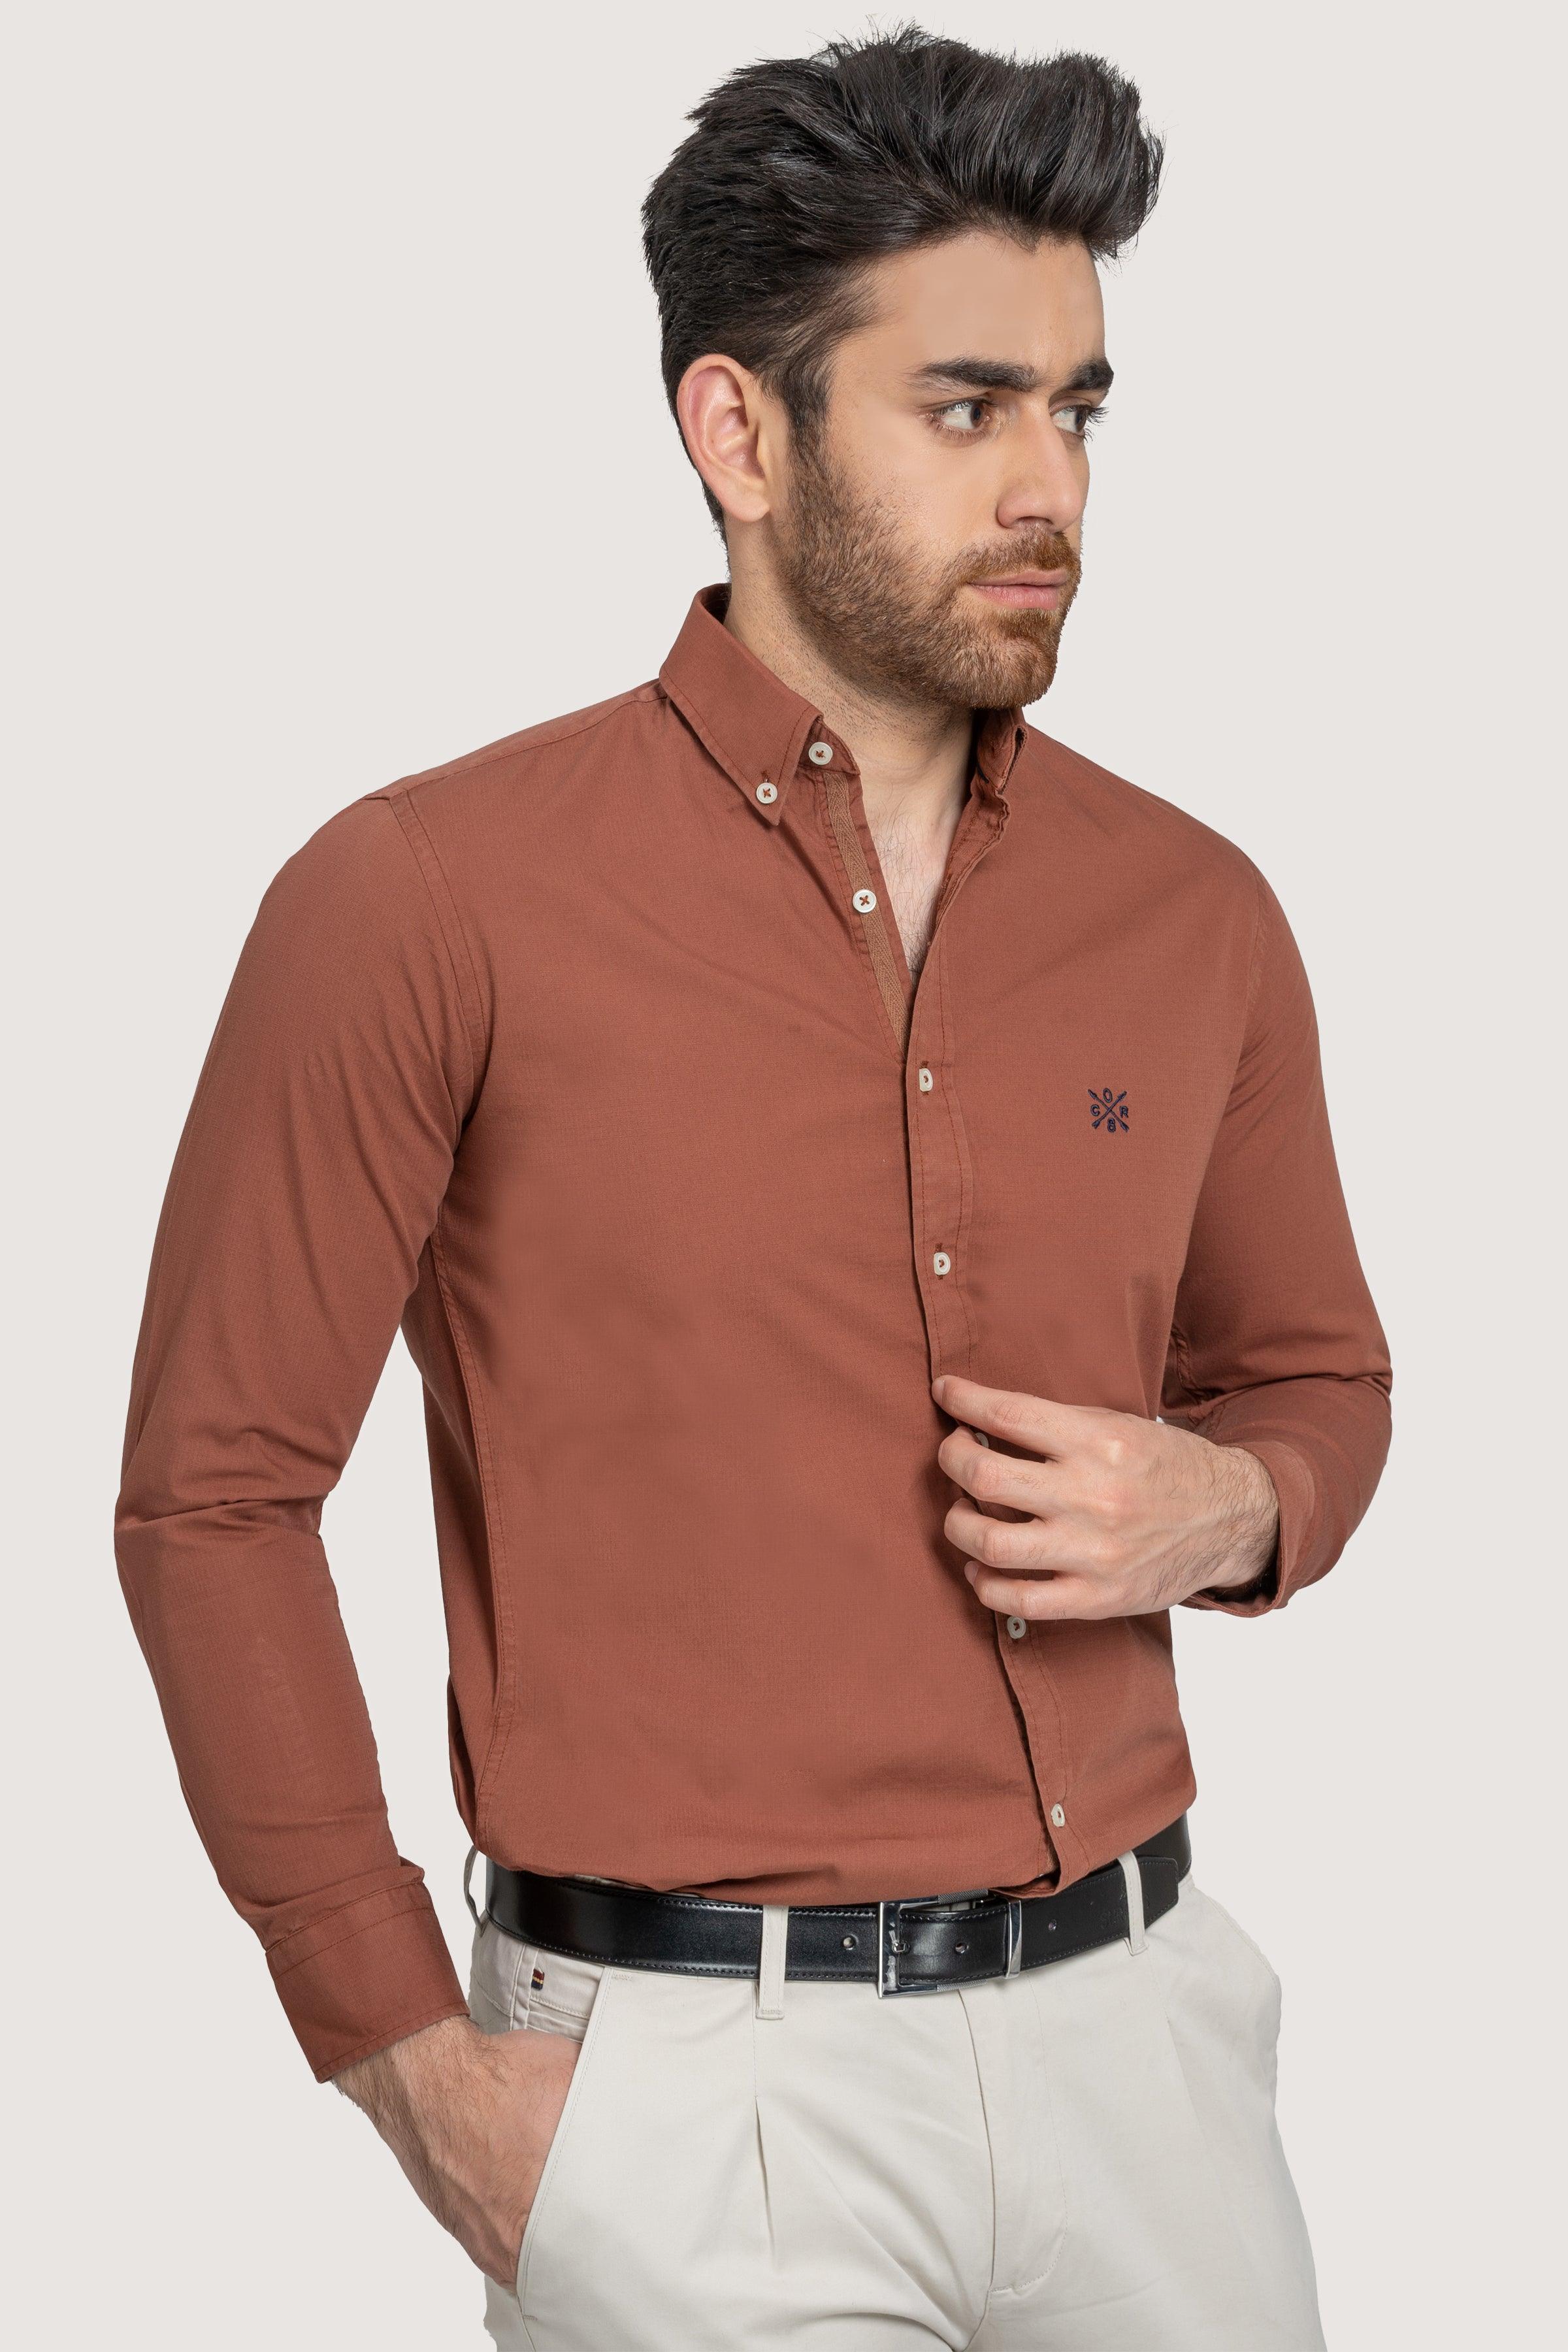 SEMI CASUAL GARMENT DYED SHIRT RUST at Charcoal Clothing